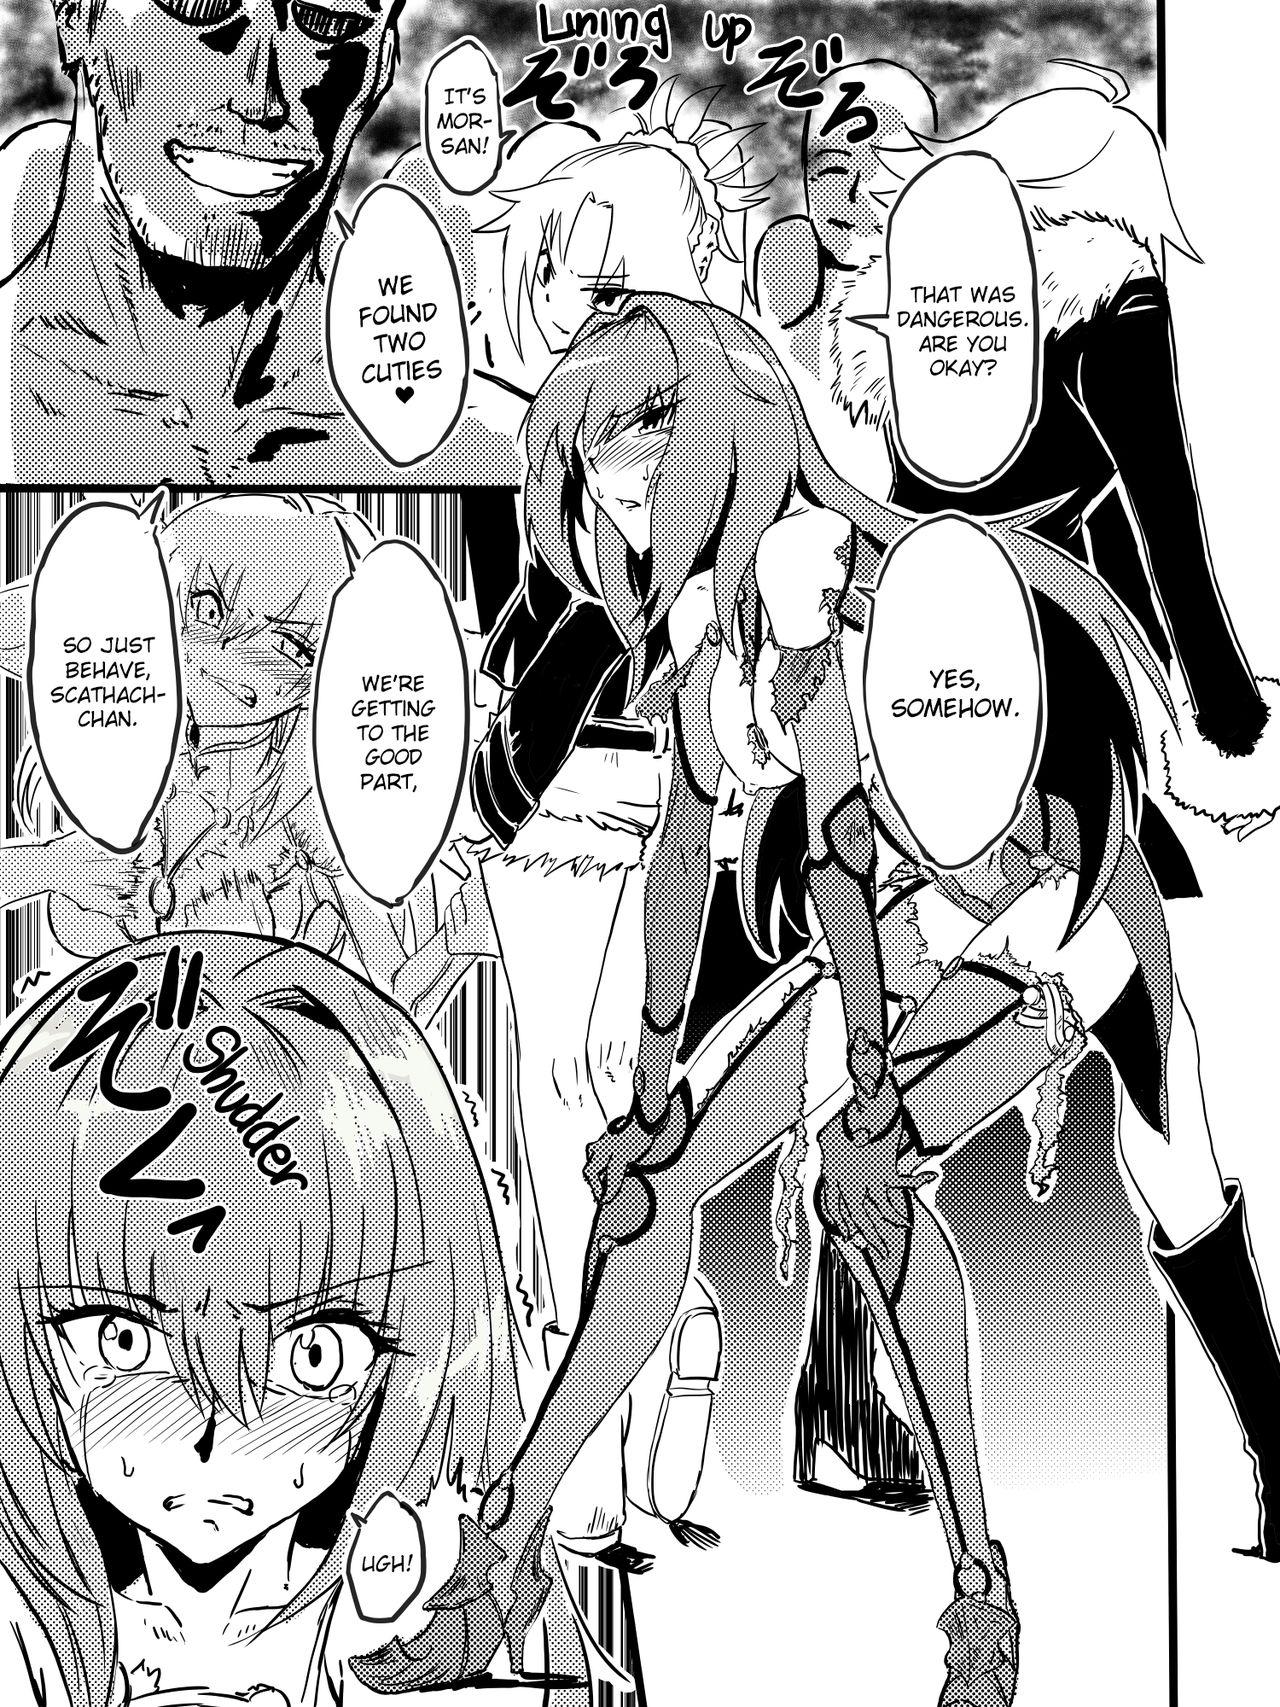 Amatuer Tousouchuu in Chaldea | Running away in Chaldea - Fate grand order Curious - Page 5